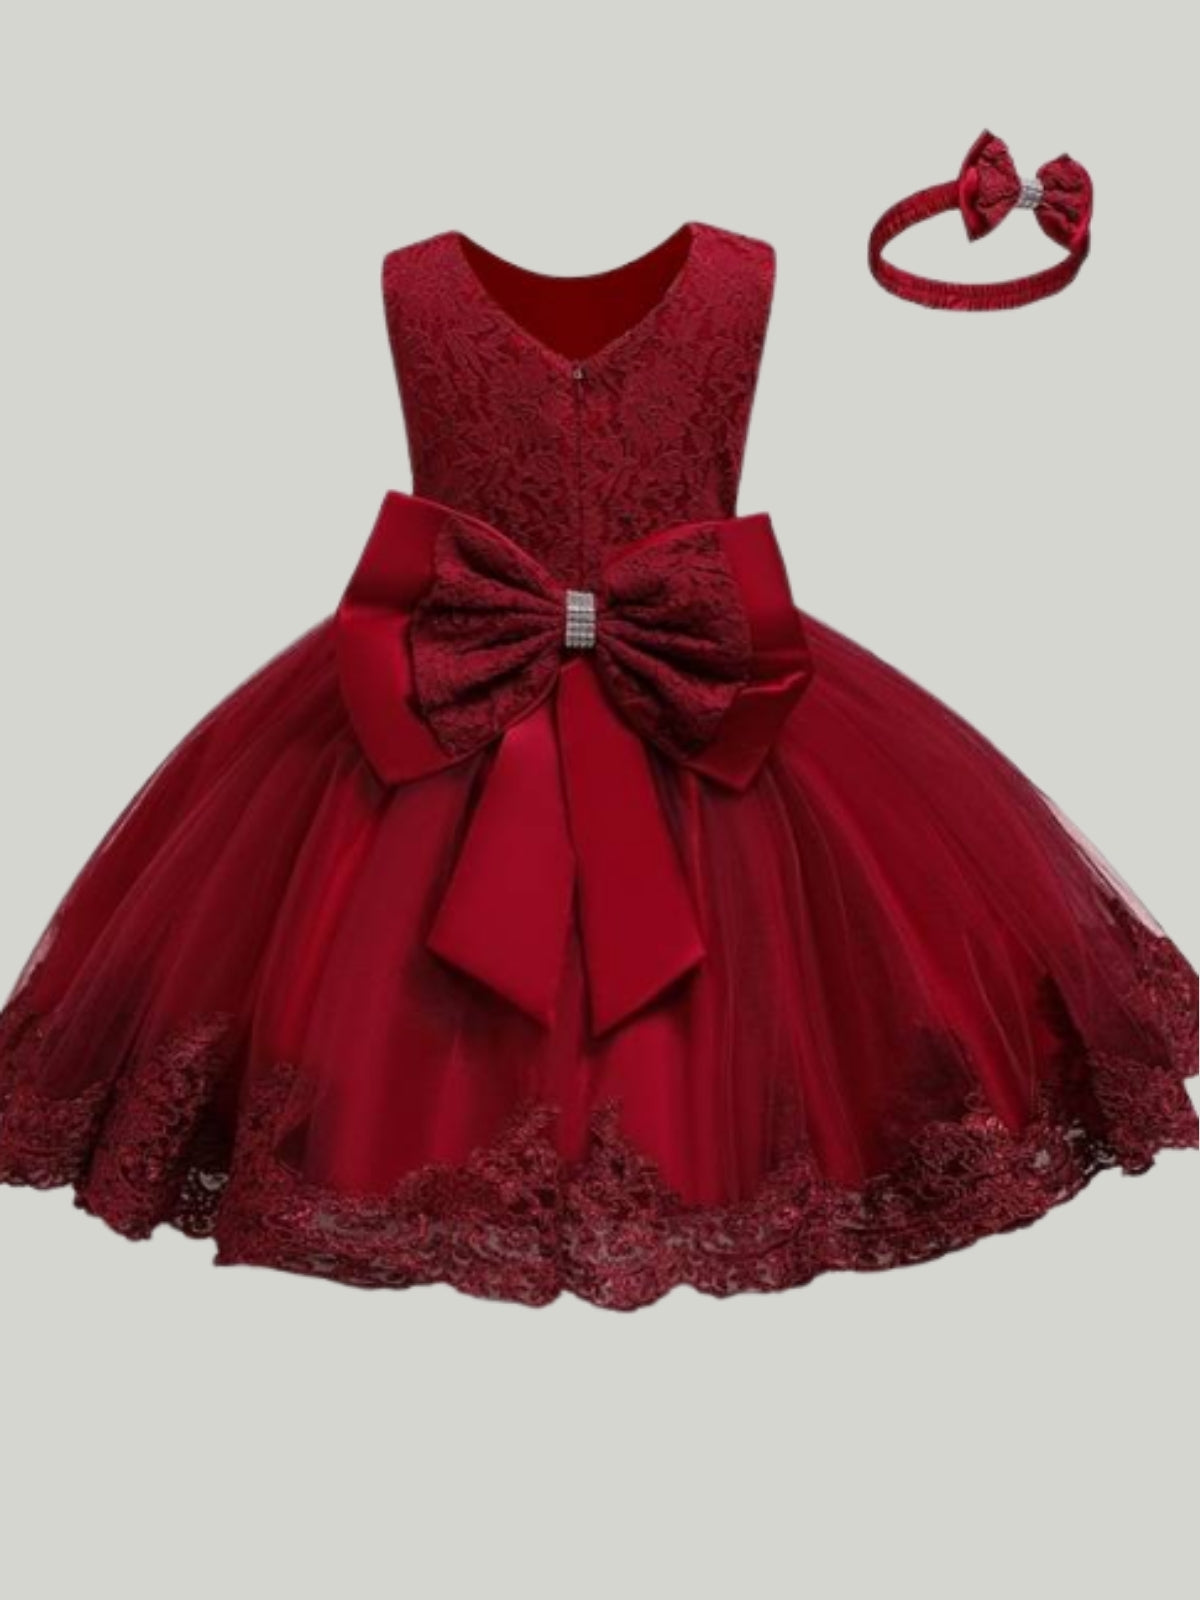 Baby Floral Lace Embroidered Beaded Dress with Bow-burgundy